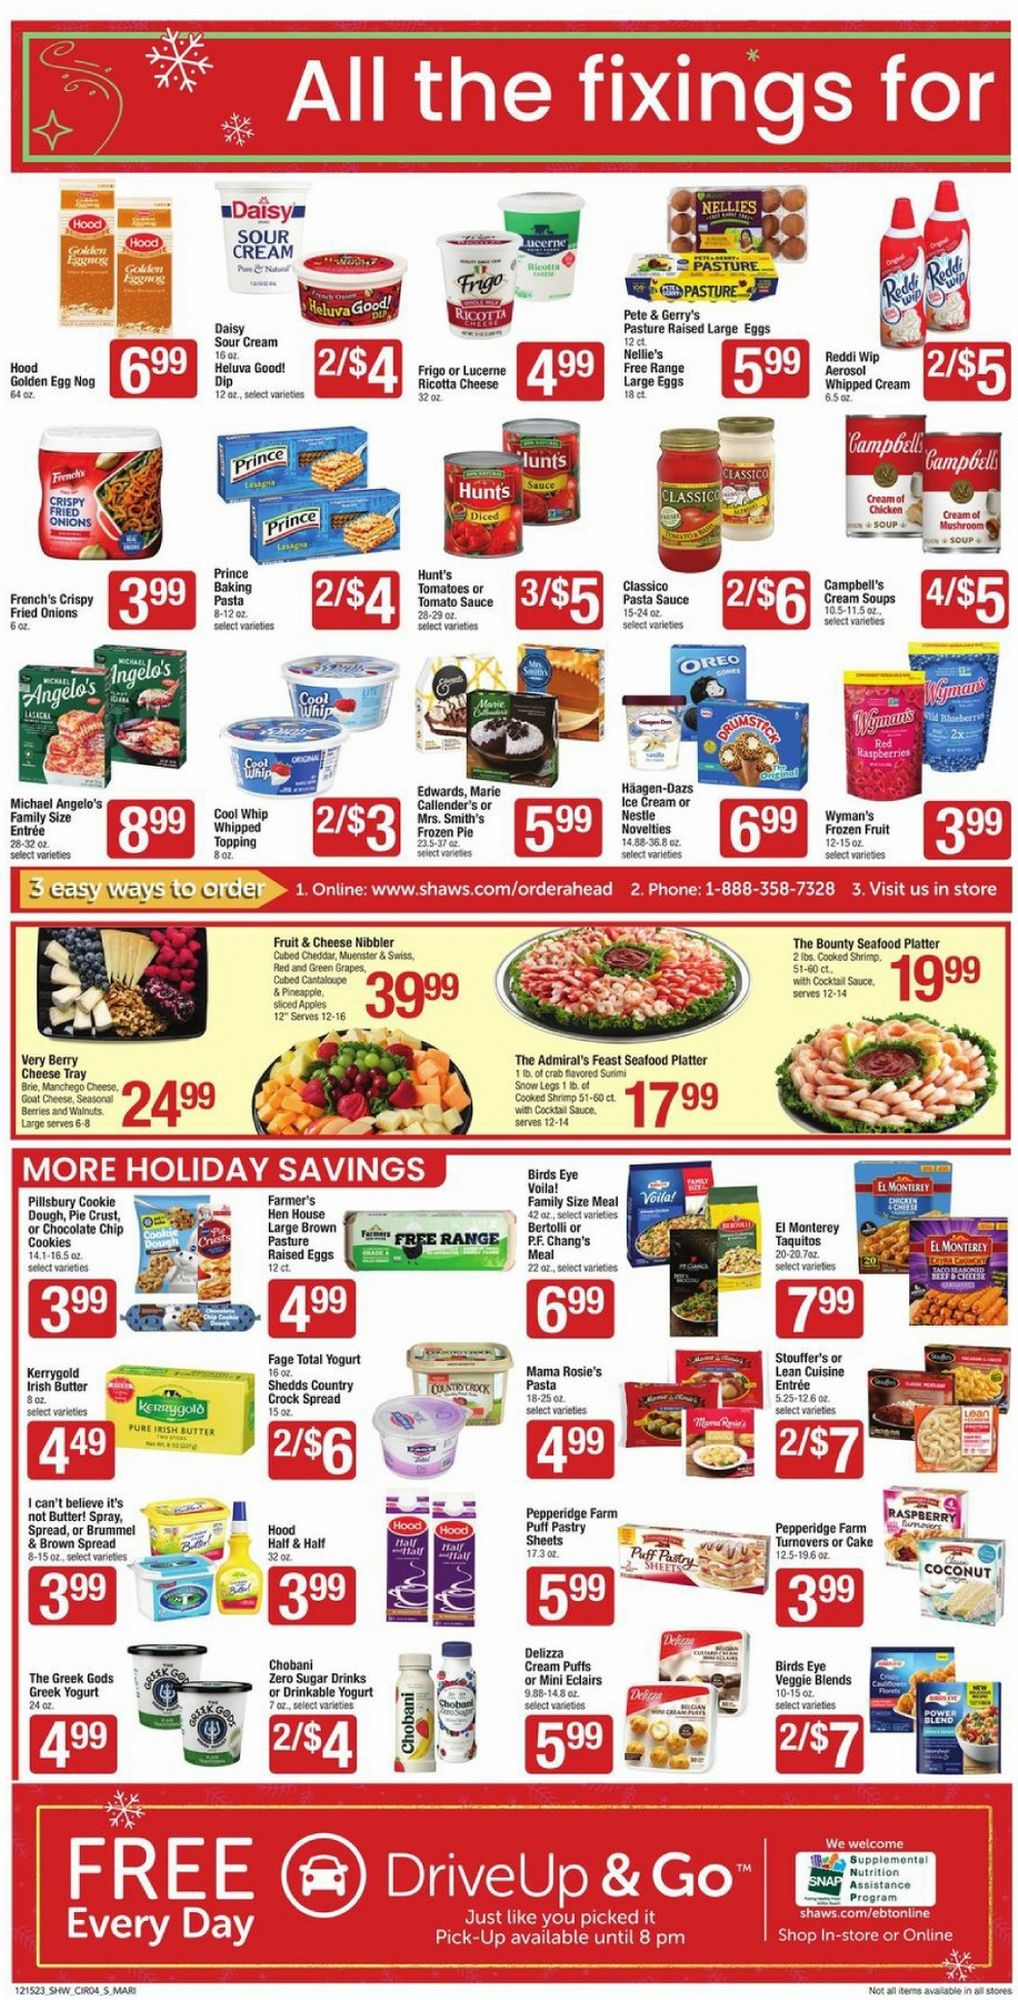 Shaw's Christmas July 2024 Weekly Sales, Deals, Discounts and Digital Coupons.